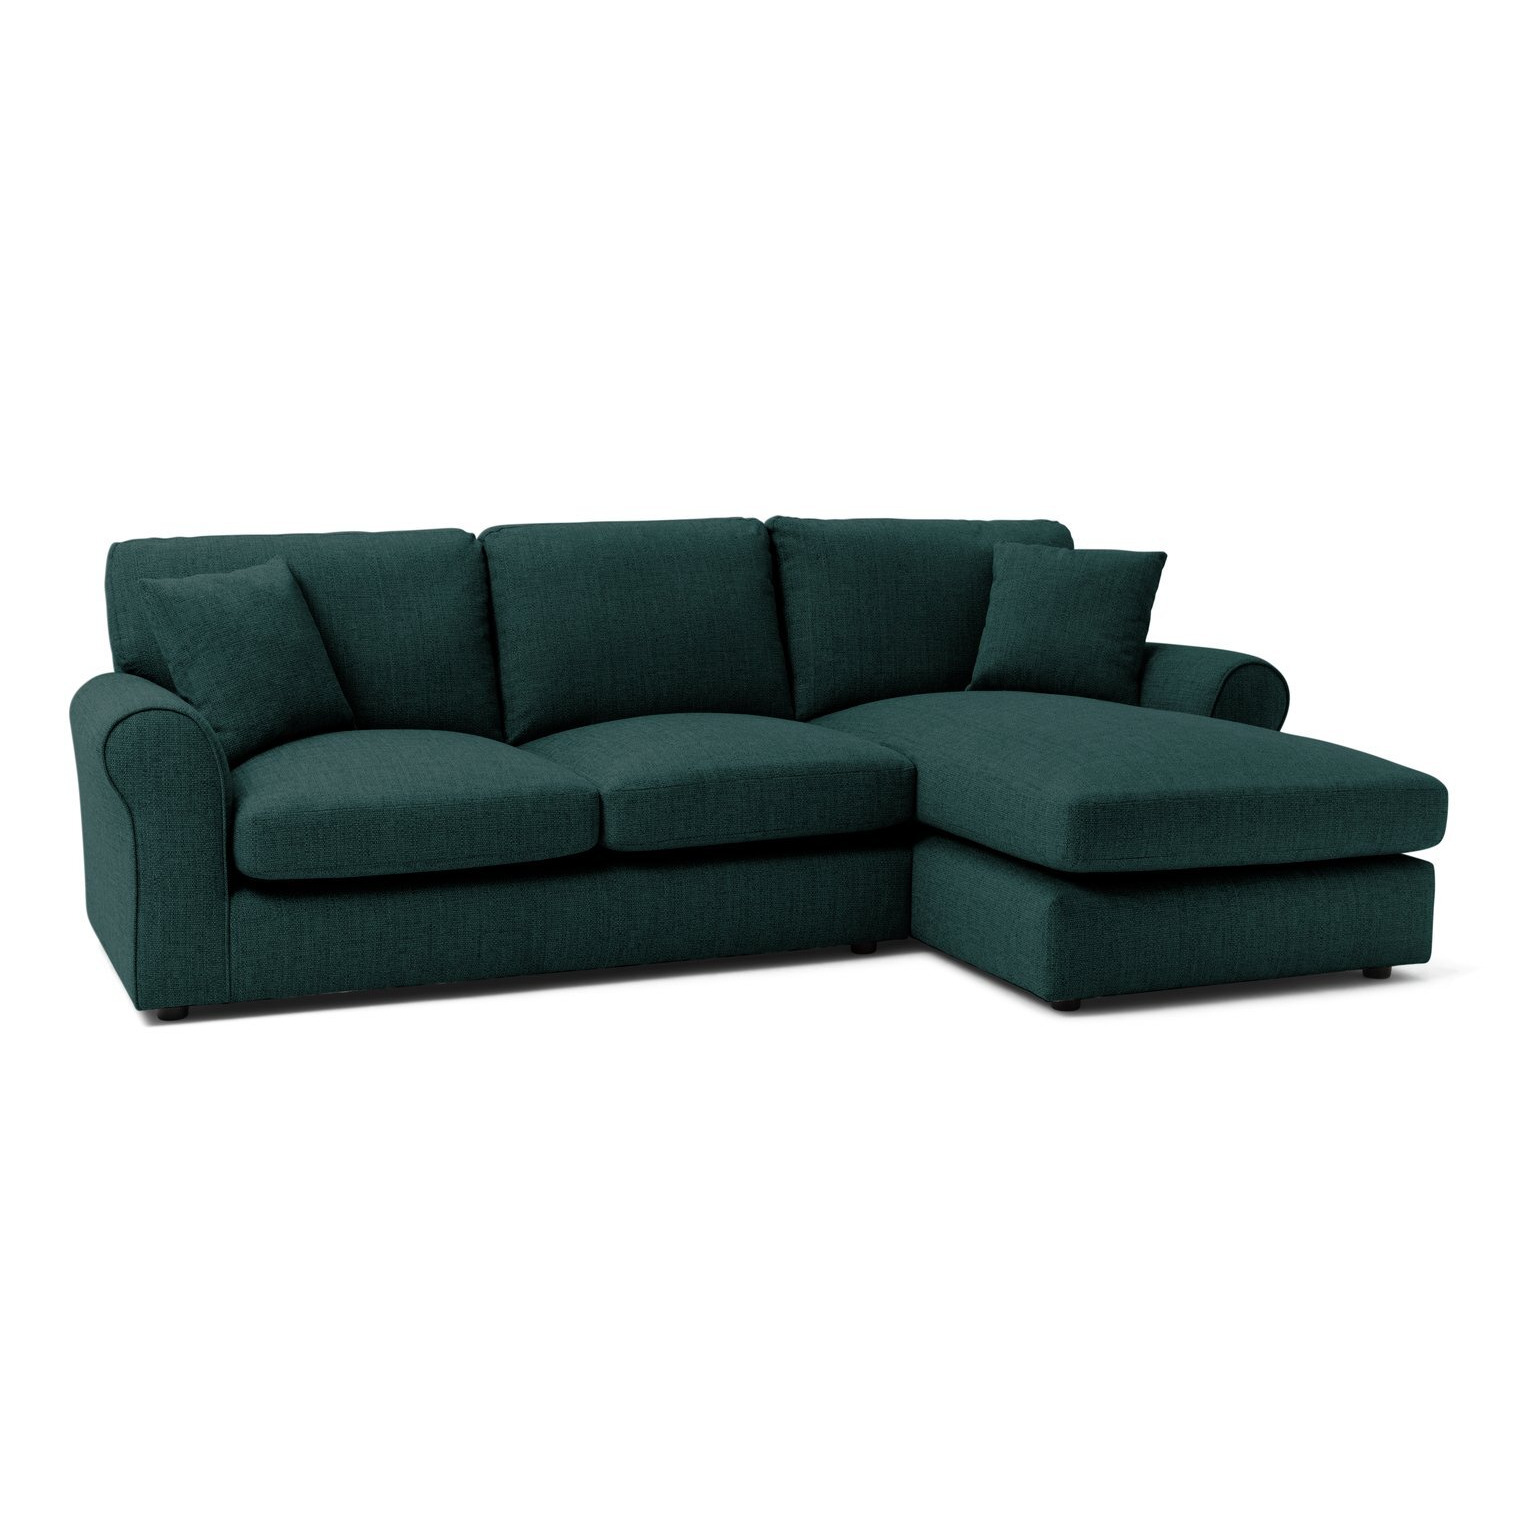 Argos Home Harry Fabric Right Hand Corner Chaise Sofa - Teal - image 1